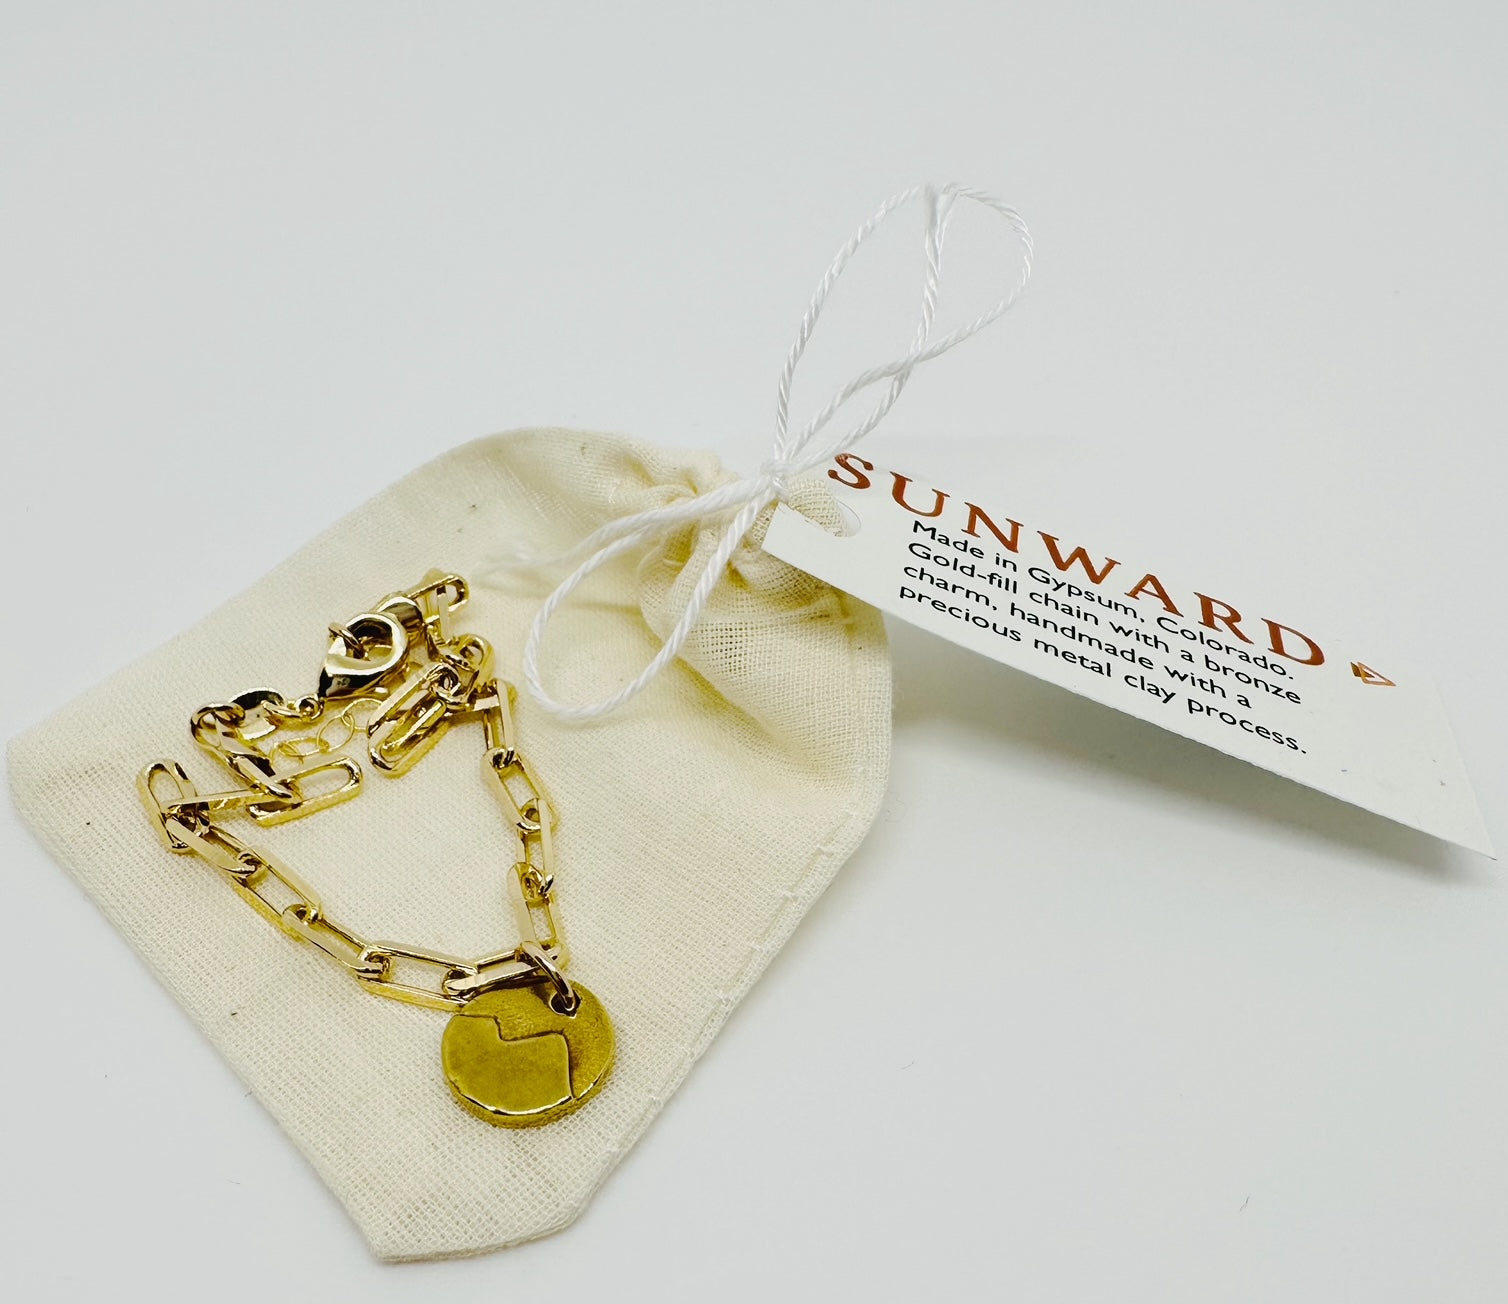 Mountain Link Bracelet on fabric bag. Gold-fill chain with a bronze mountain charm, handmade with a precious metal clay process. 